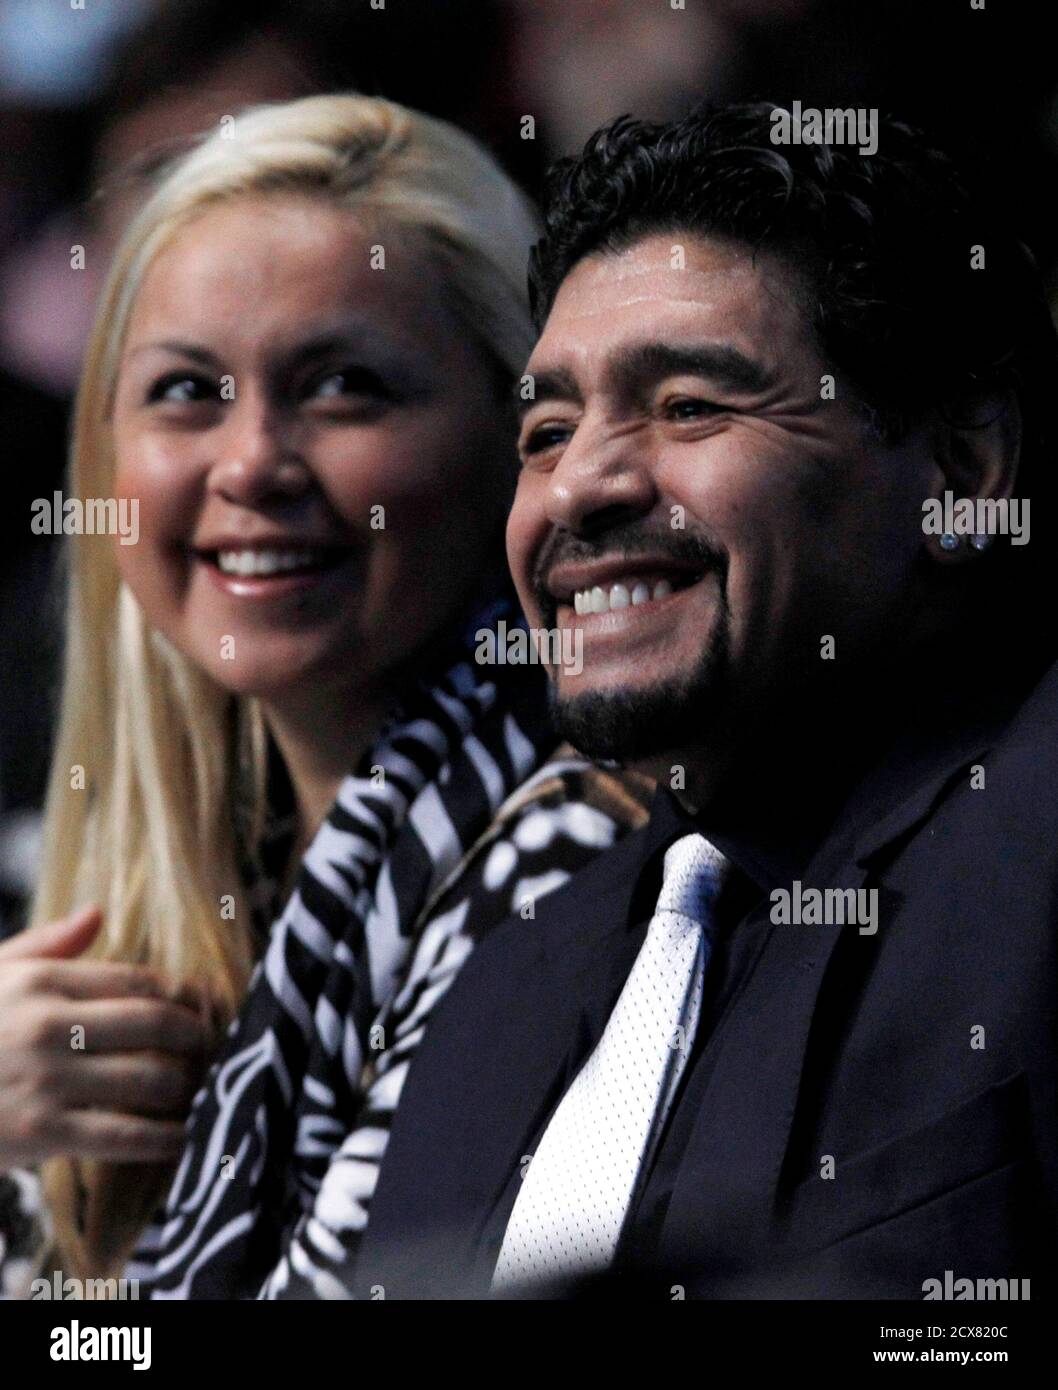 Former Argentine soccer star Diego Maradona and Veronica Ojeda watch the  finals match between Spain's Rafael Nadal and Switzerland's Roger Federer  at the ATP World Tour Finals in London November 28, 2010.